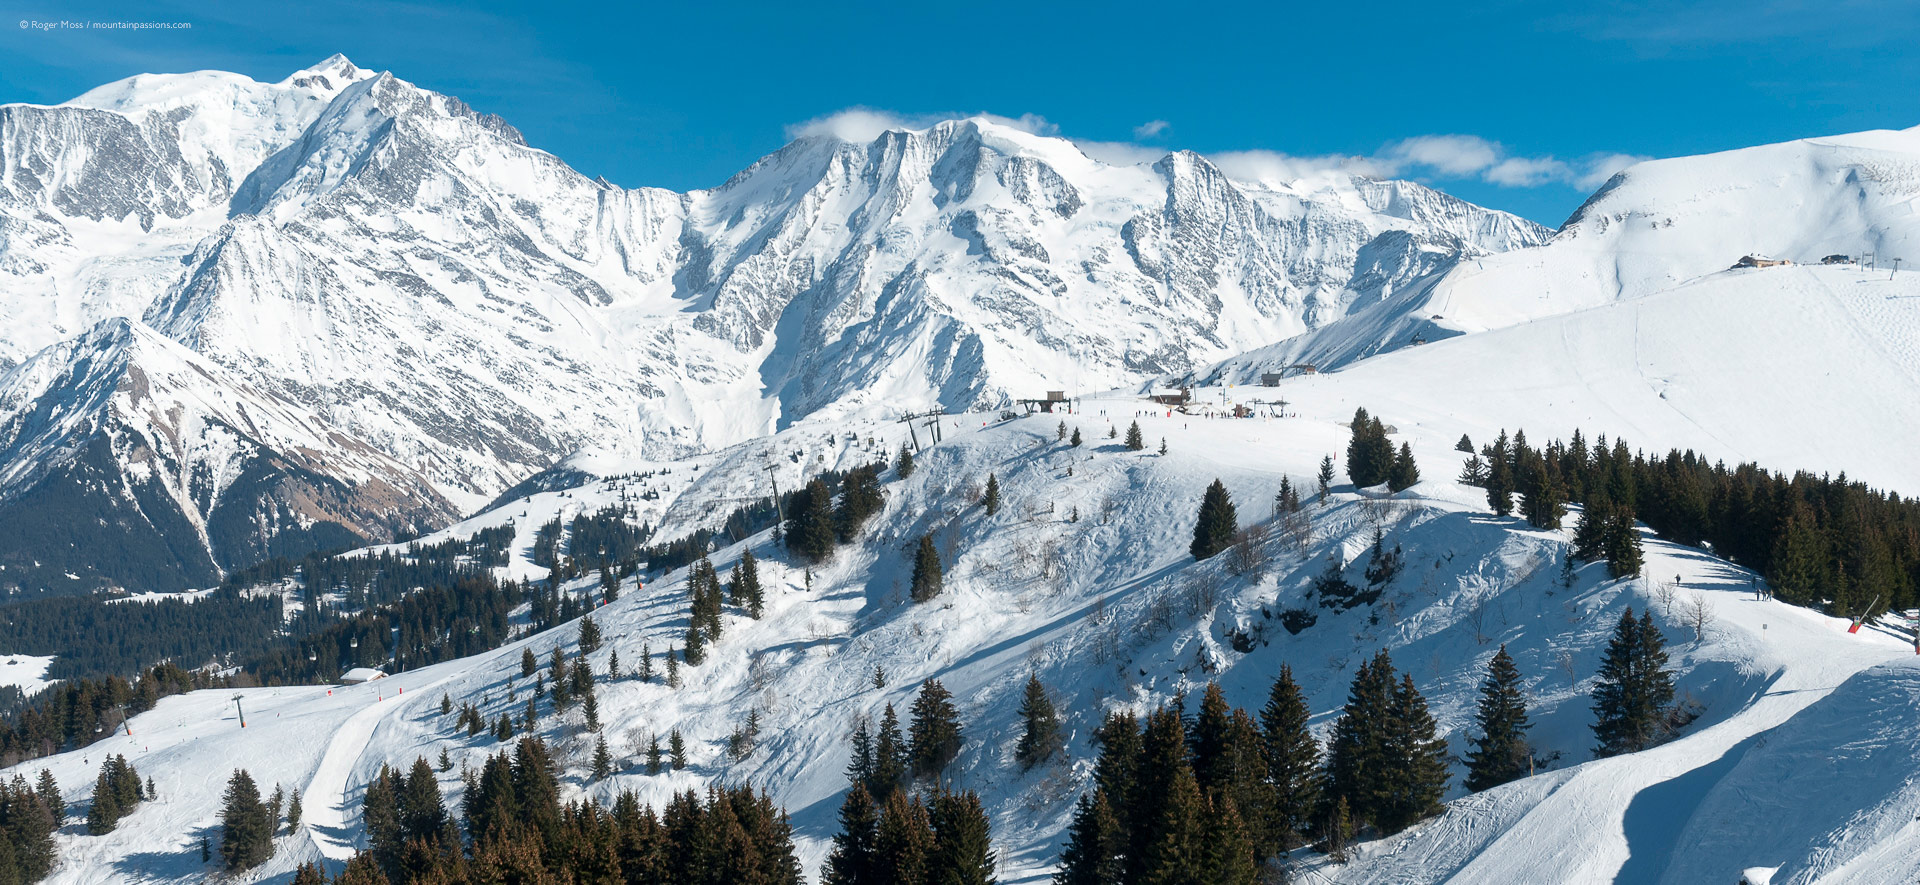 Wide view of snow-covered mountains, with distant ski lift, pistes and Mont-Blanc in background.